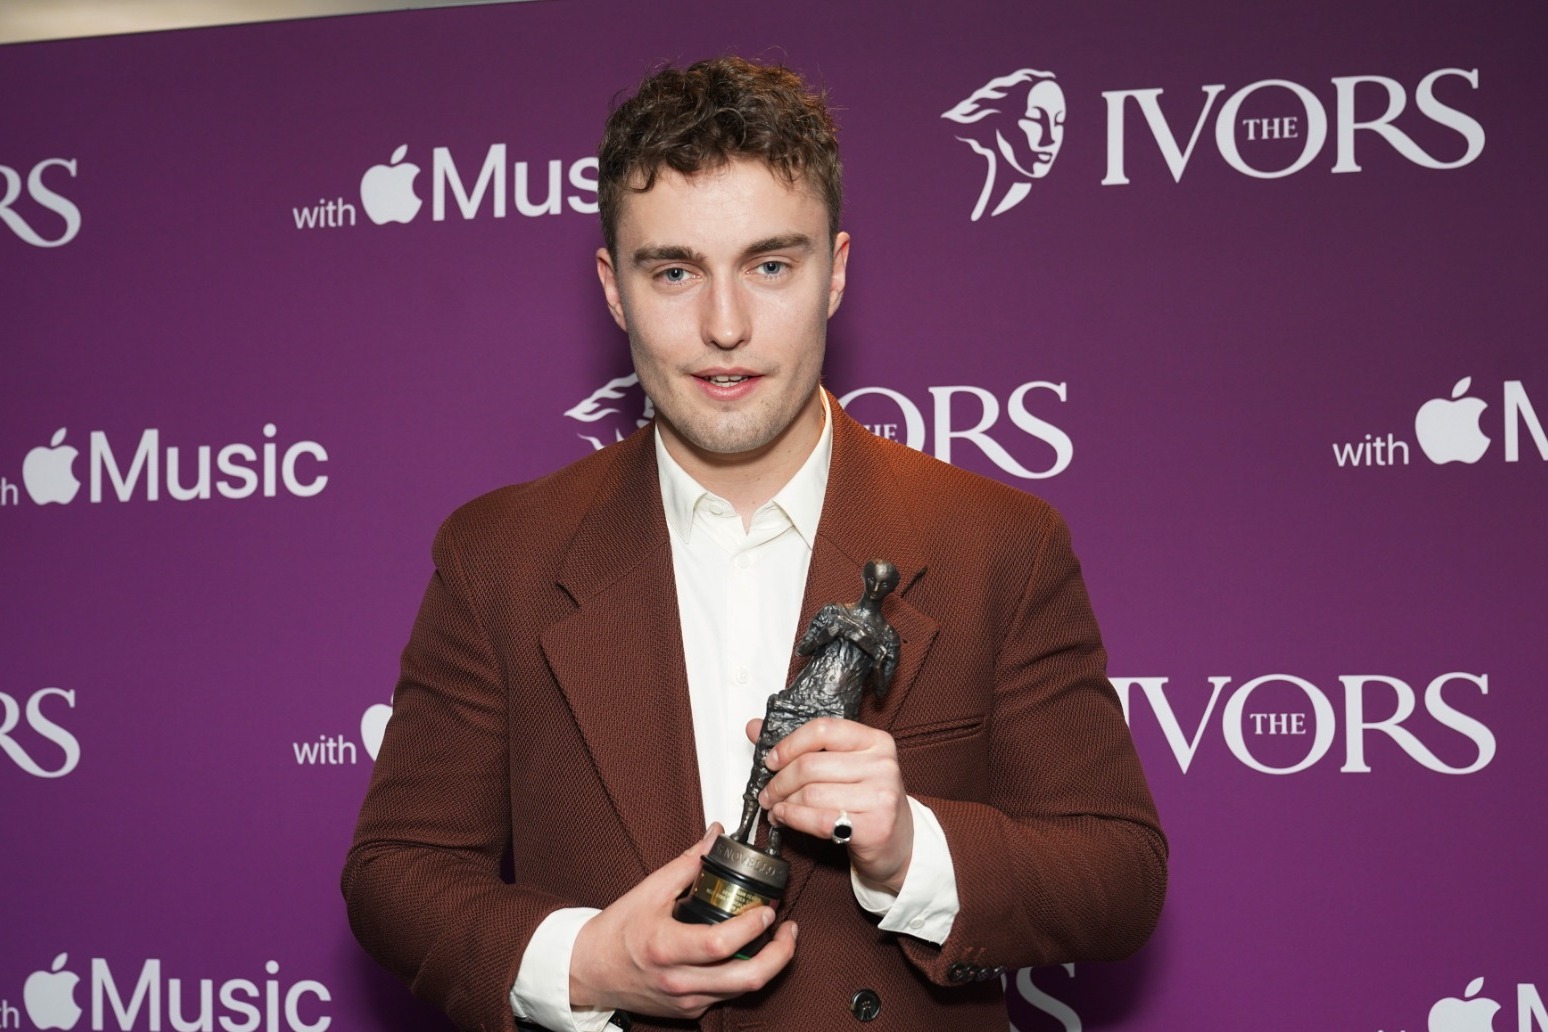 Sam Fender jokes he plans to destroy a Keir Starmer pinata with his Ivor Award 